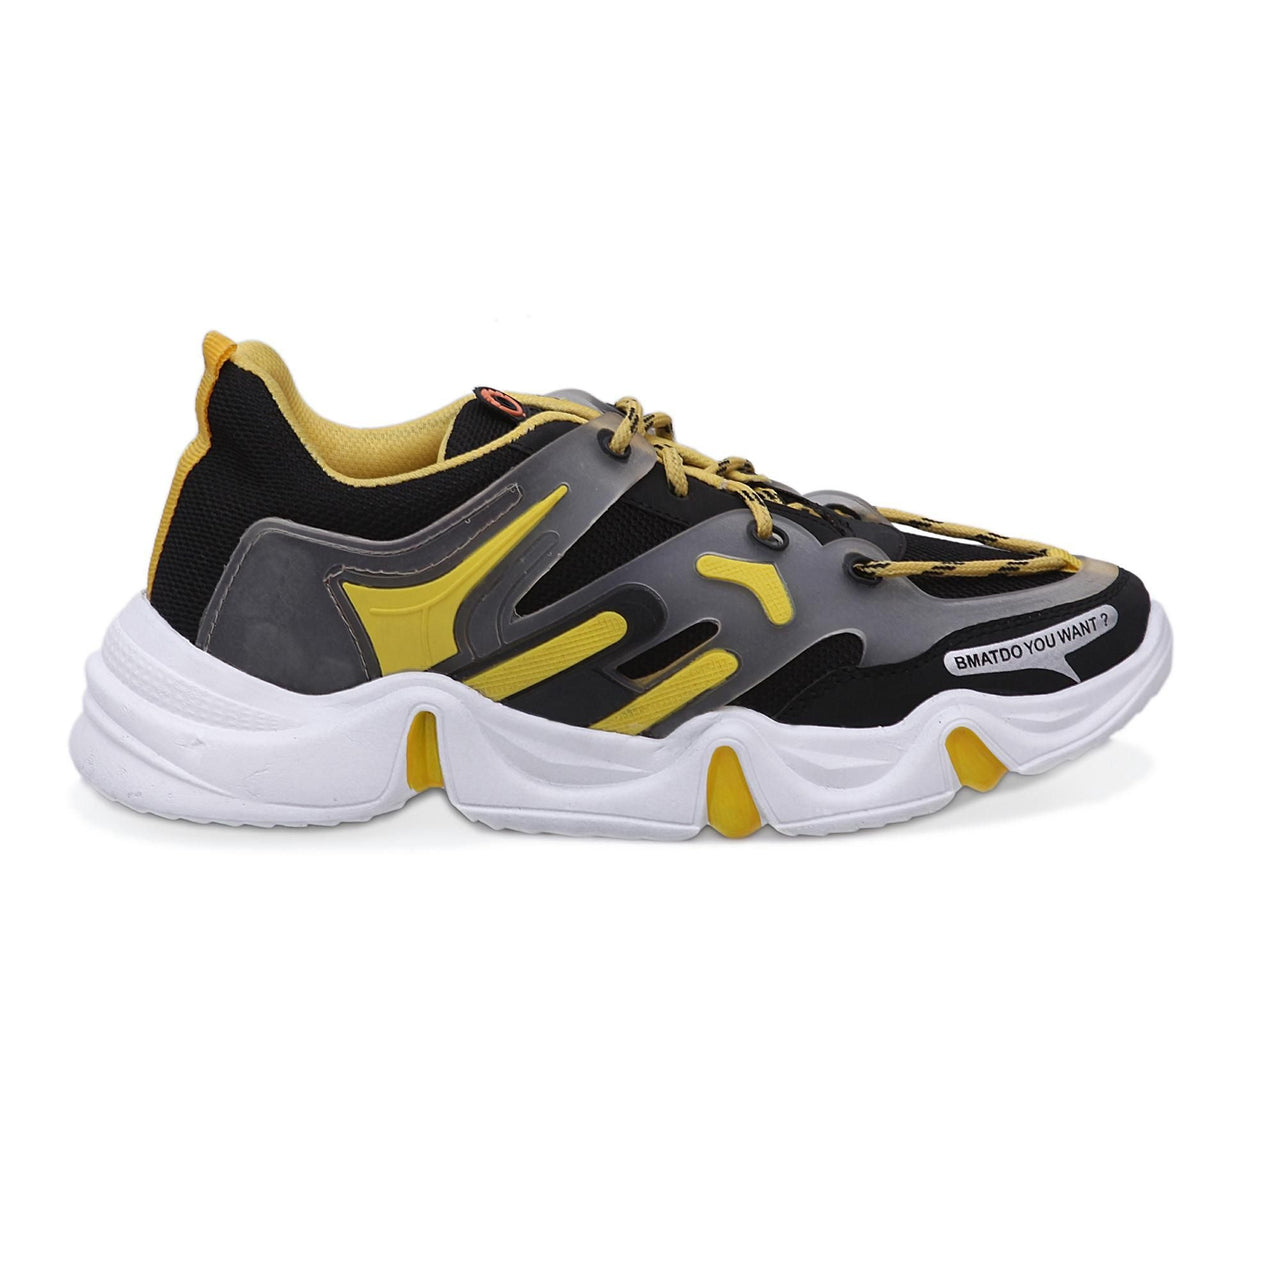 Cool Yellow & Grey Casual Sports Shoes for Men